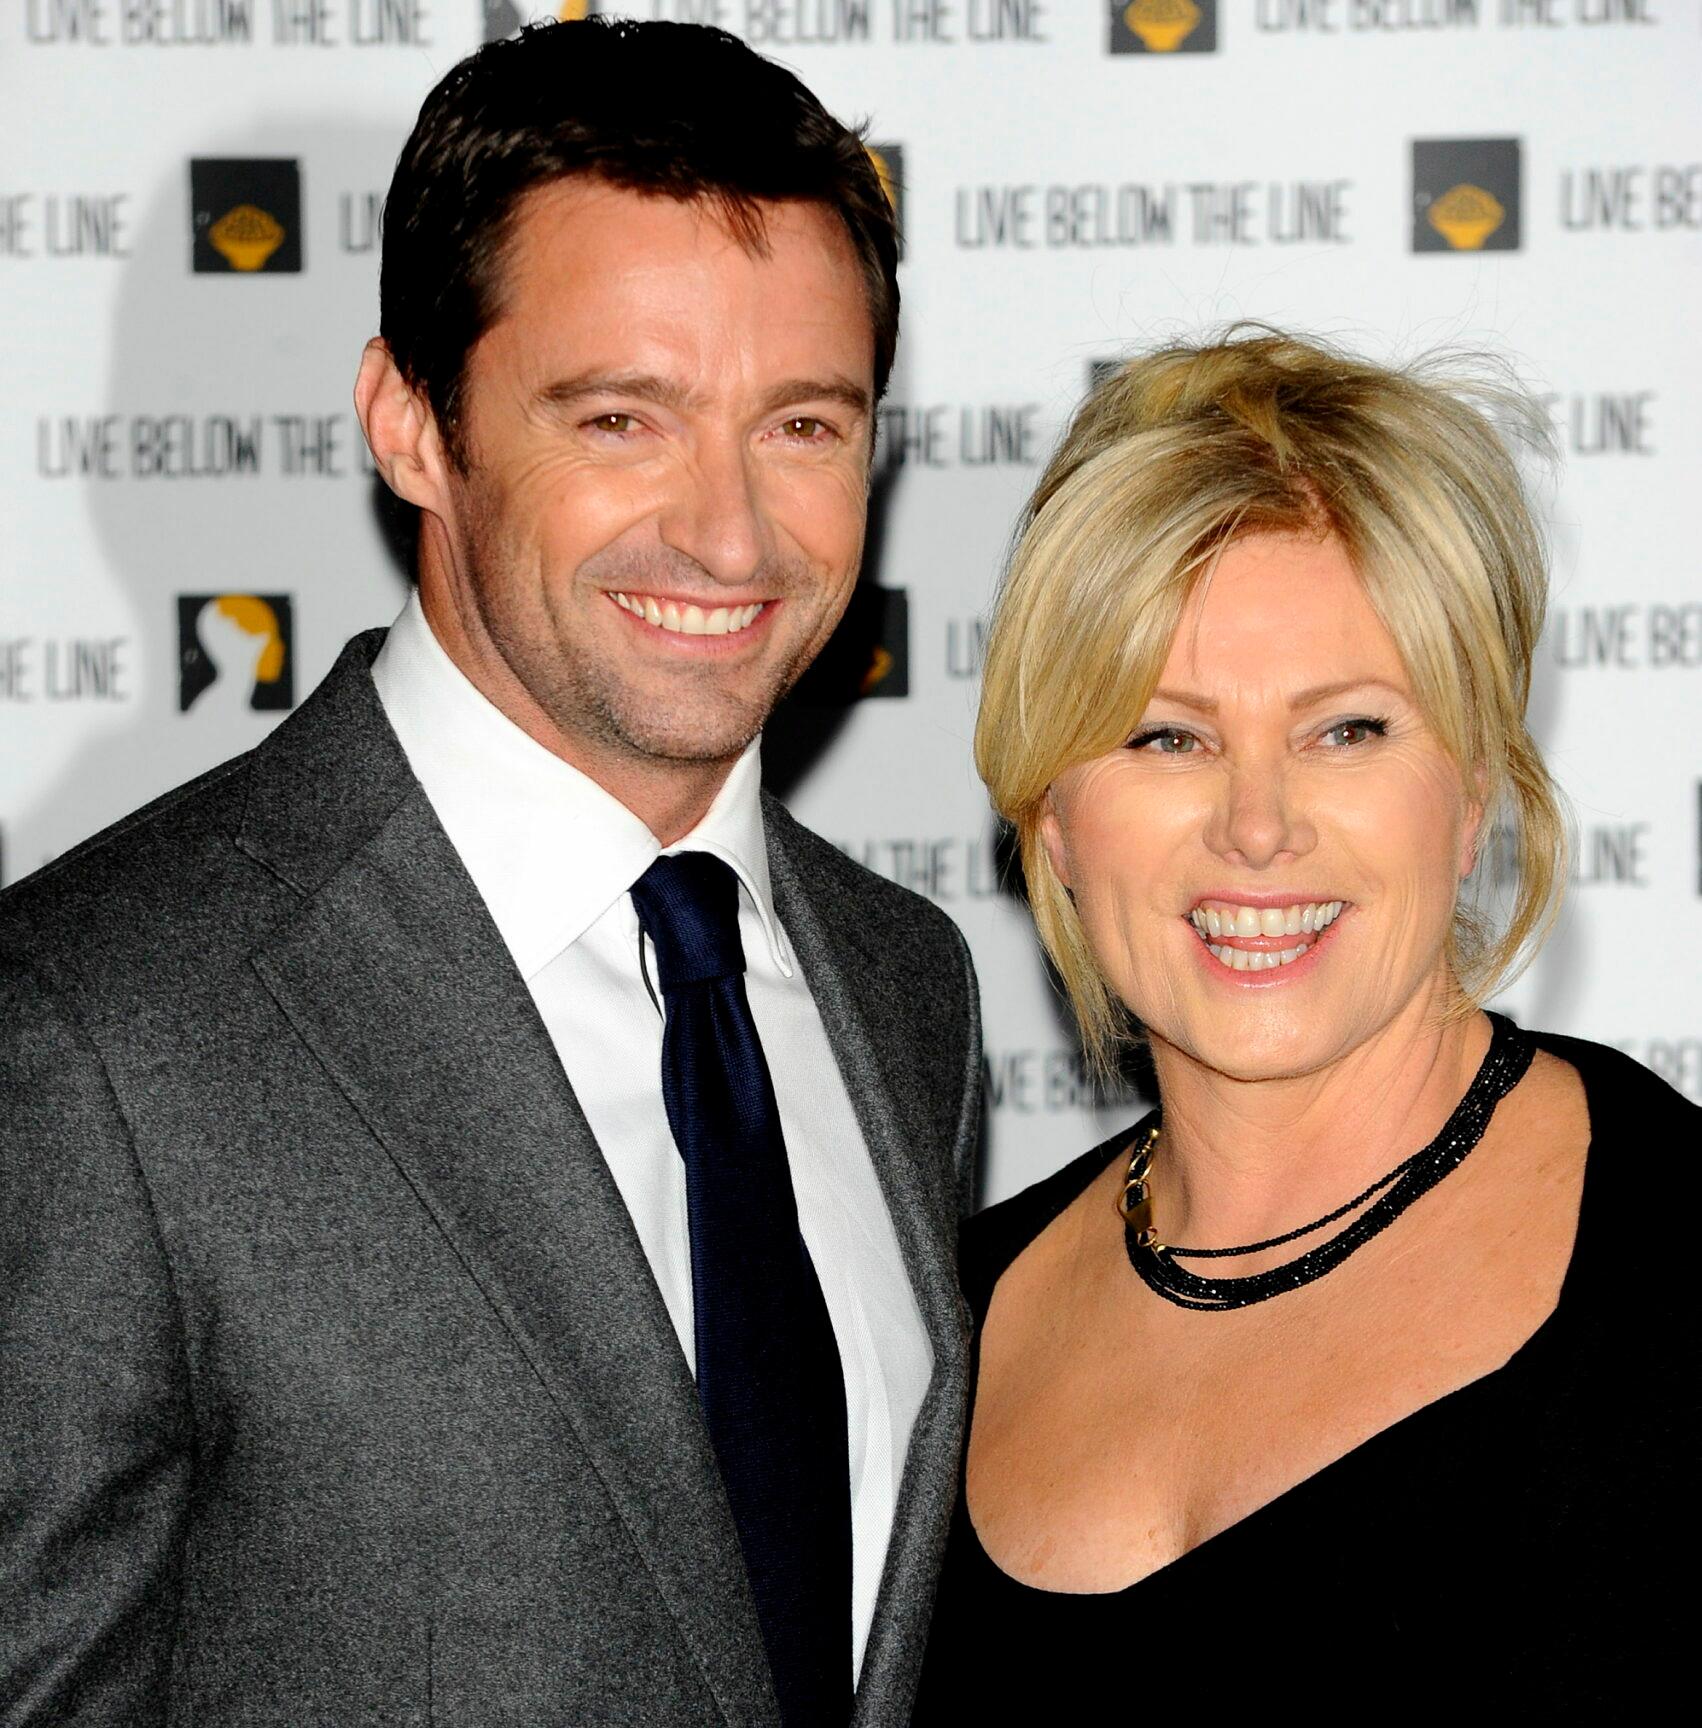 Hugh Jackman and Deborah Lee-Furness hosts a private event, promoting the charitable campaign 'Live Below the Line'